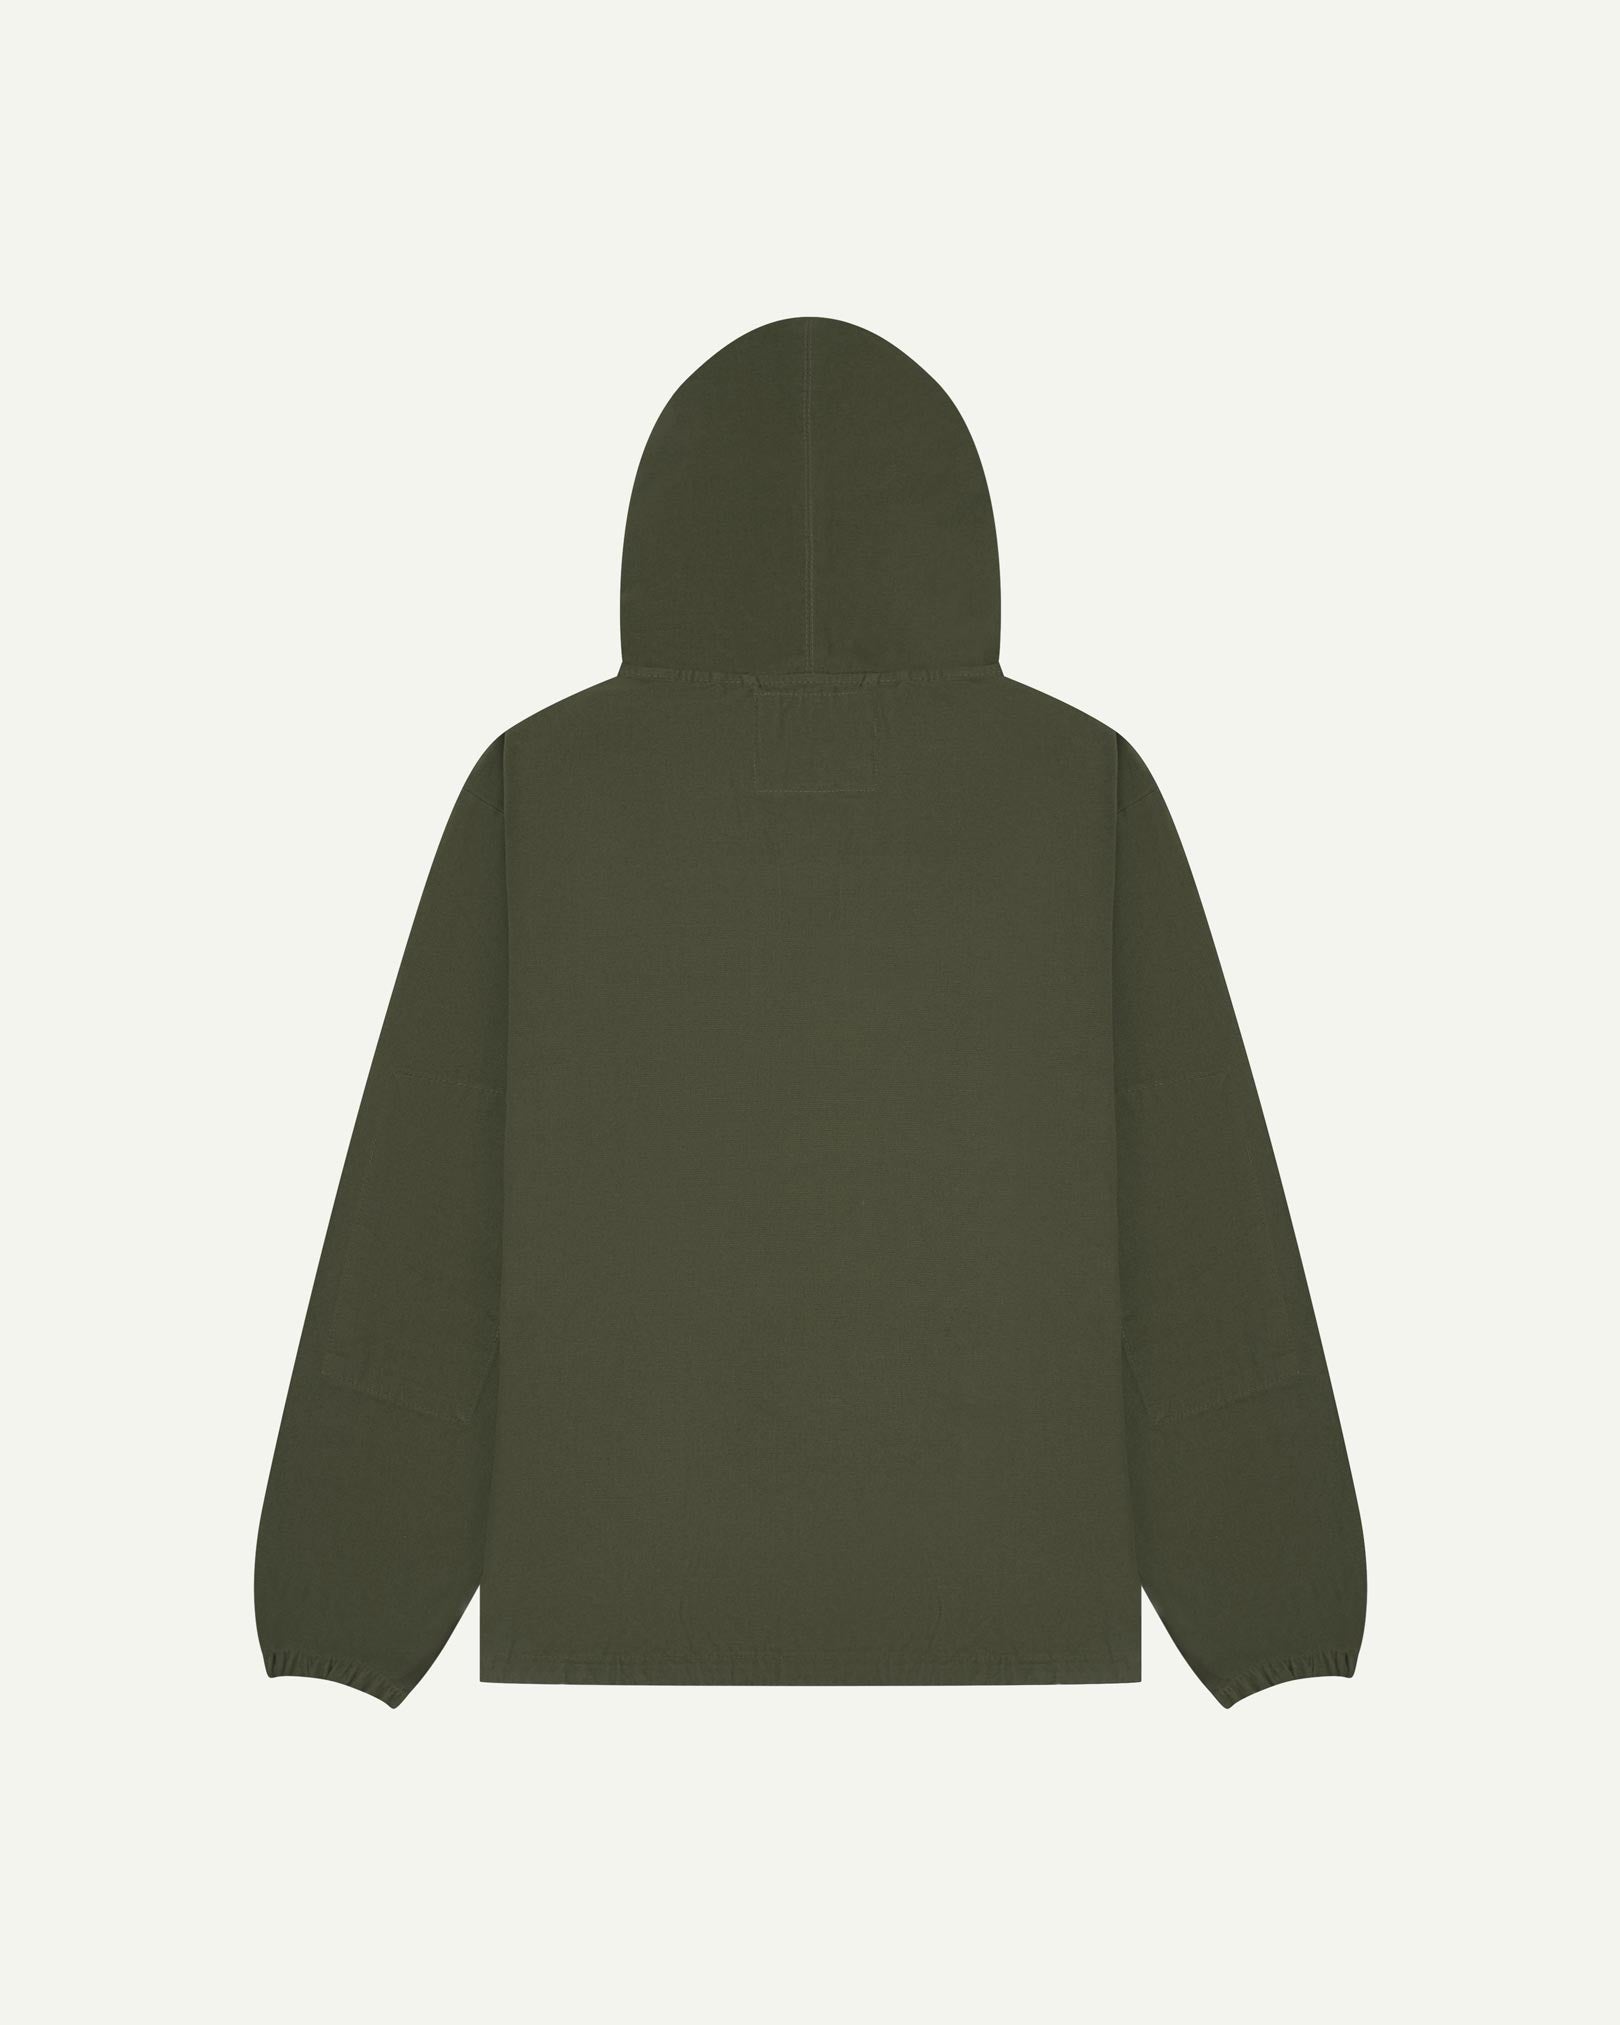 Back flat shot of Uskees vine green organic cotton smock showing reinforced elbows, back of hood and loose silhouette.